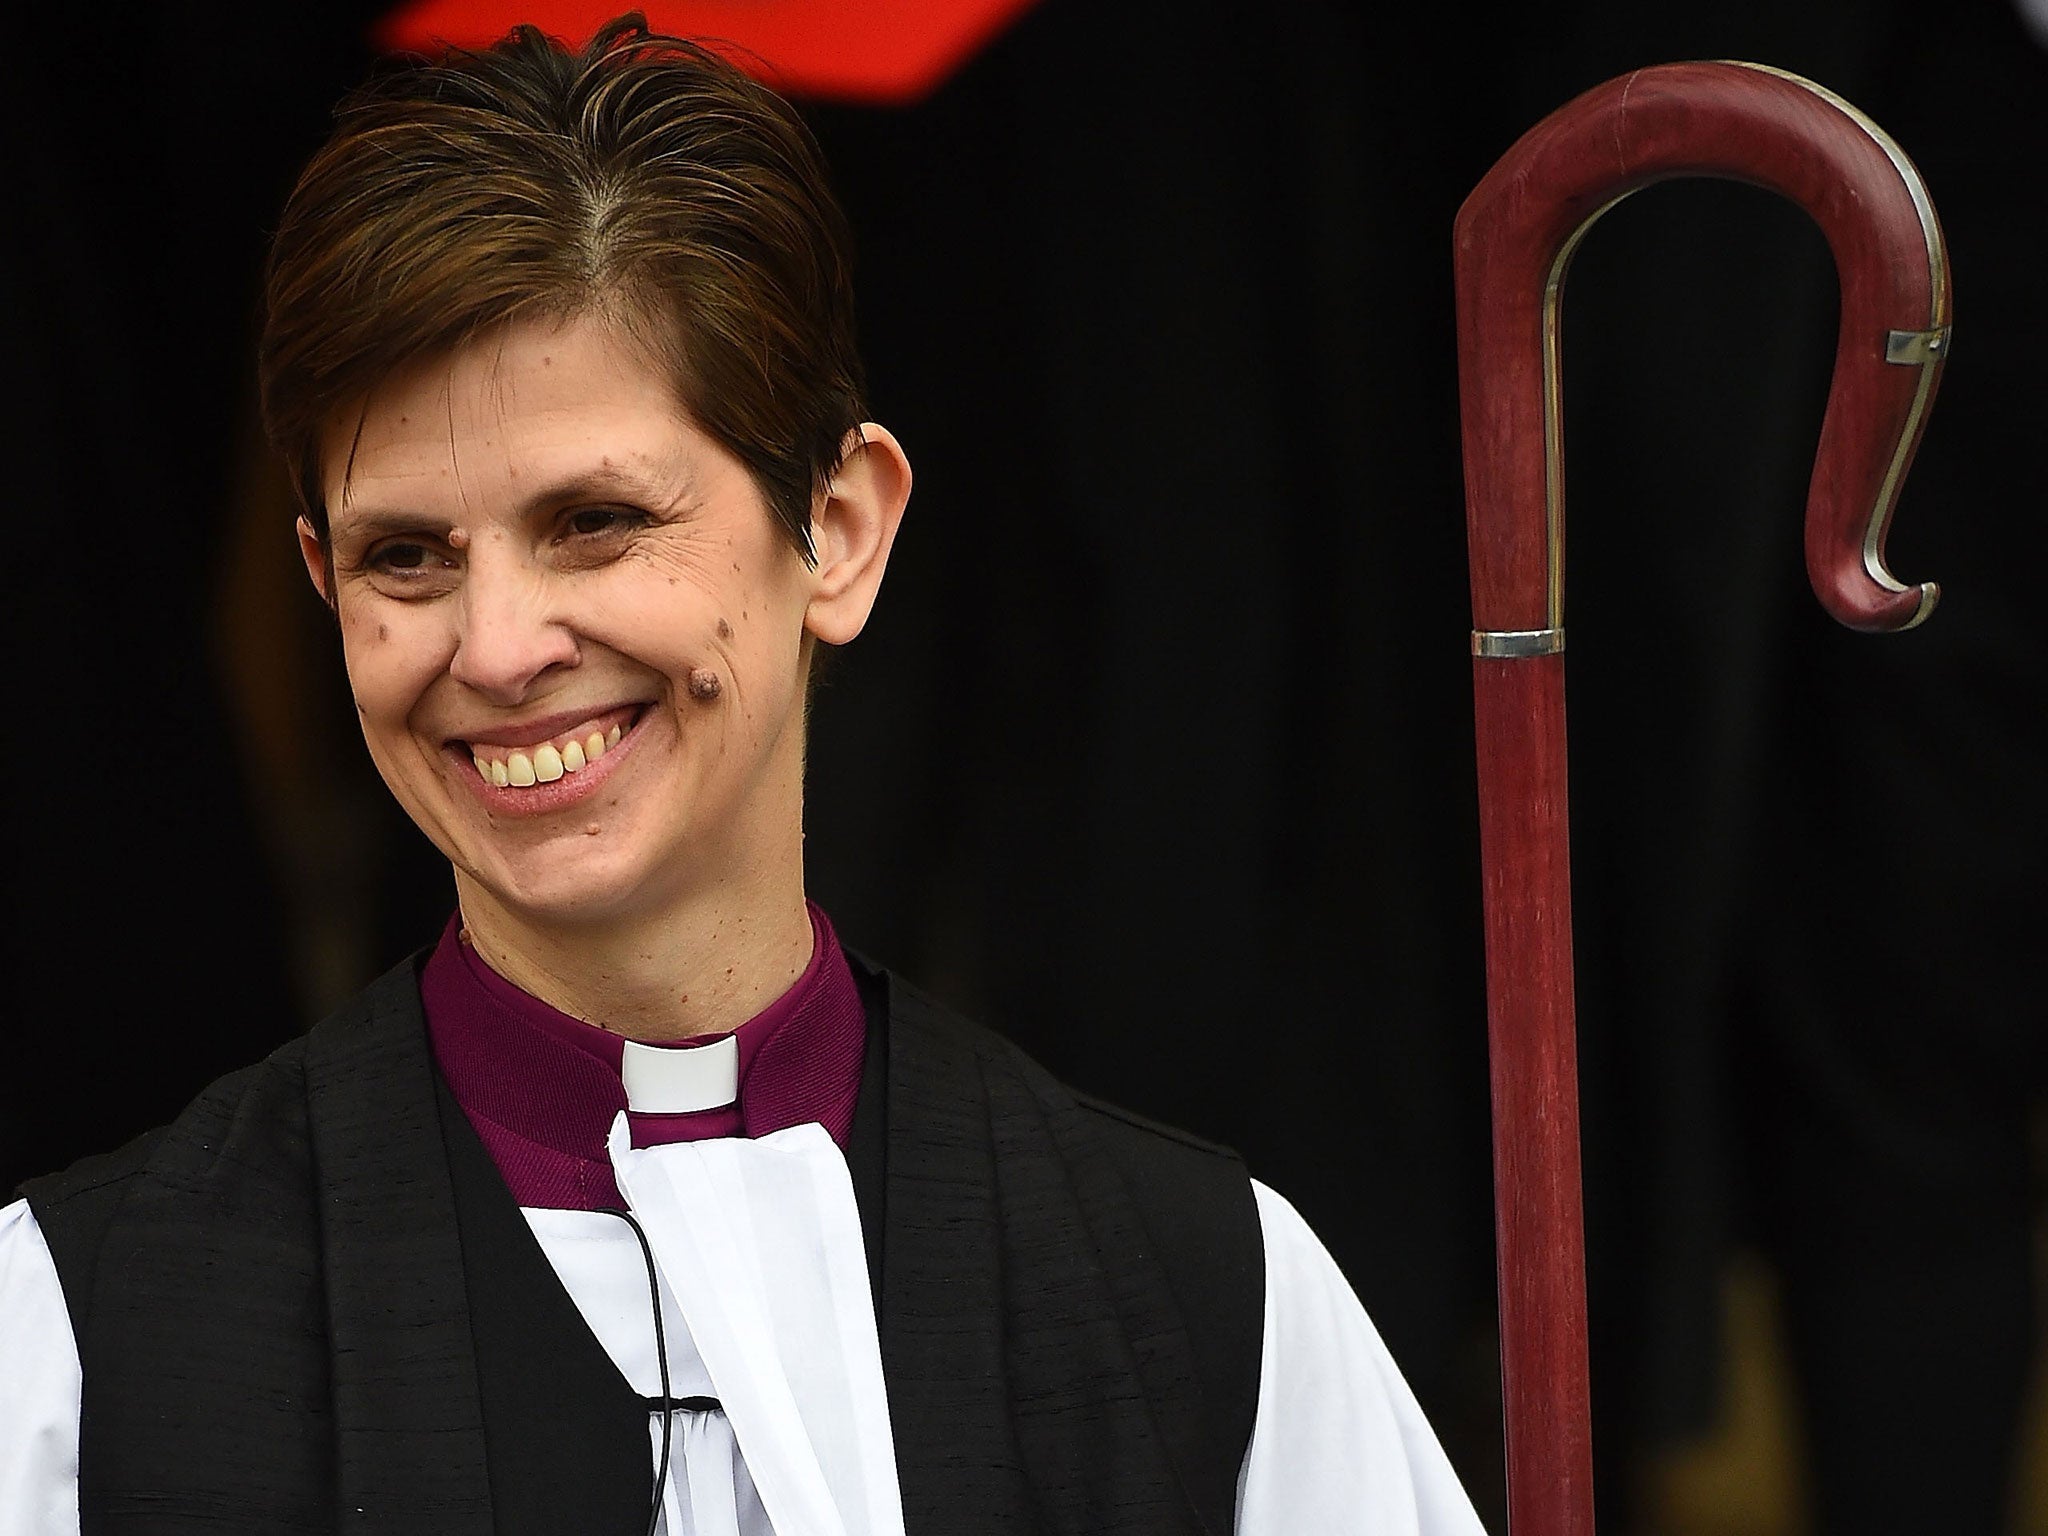 The Right Reverend Libby Lane was consecrated as the eighth Bishop of Stockport in January 2015